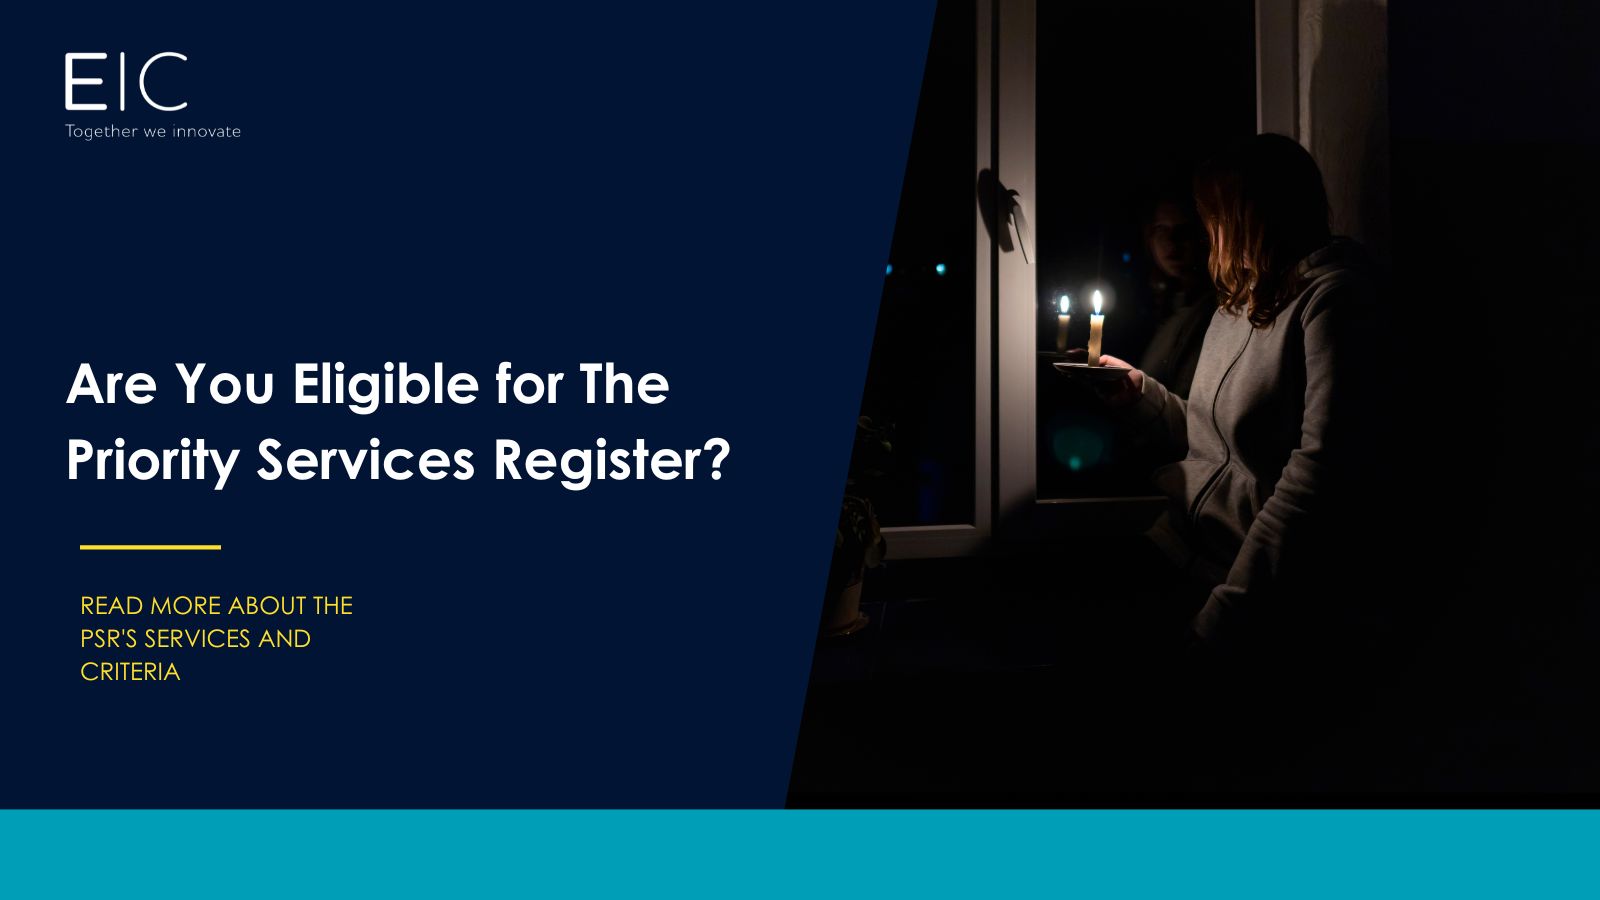 Are You Eligible For The Priority Services Register?